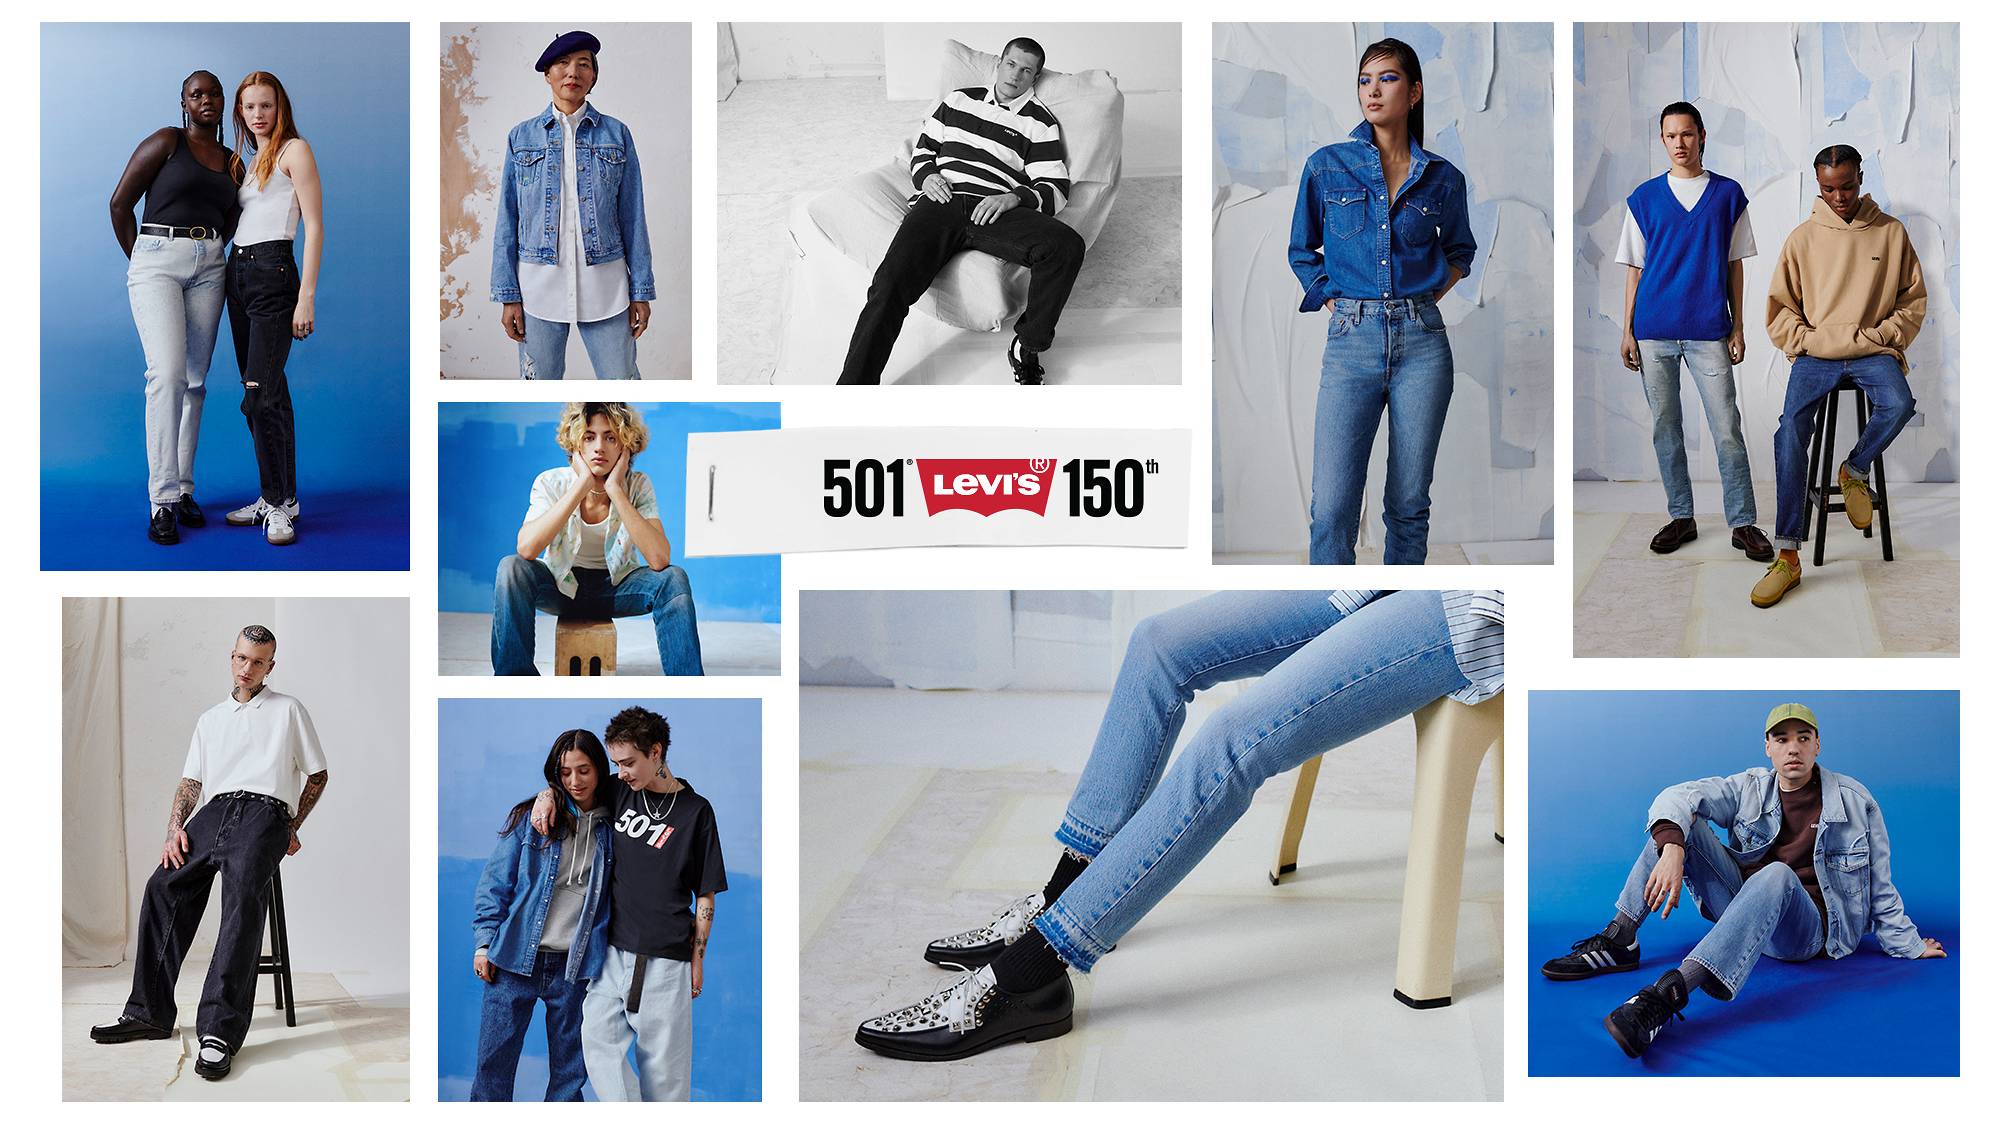 90s Jeans Are Taking Back the Mall, One Retro Silhouette at a Time